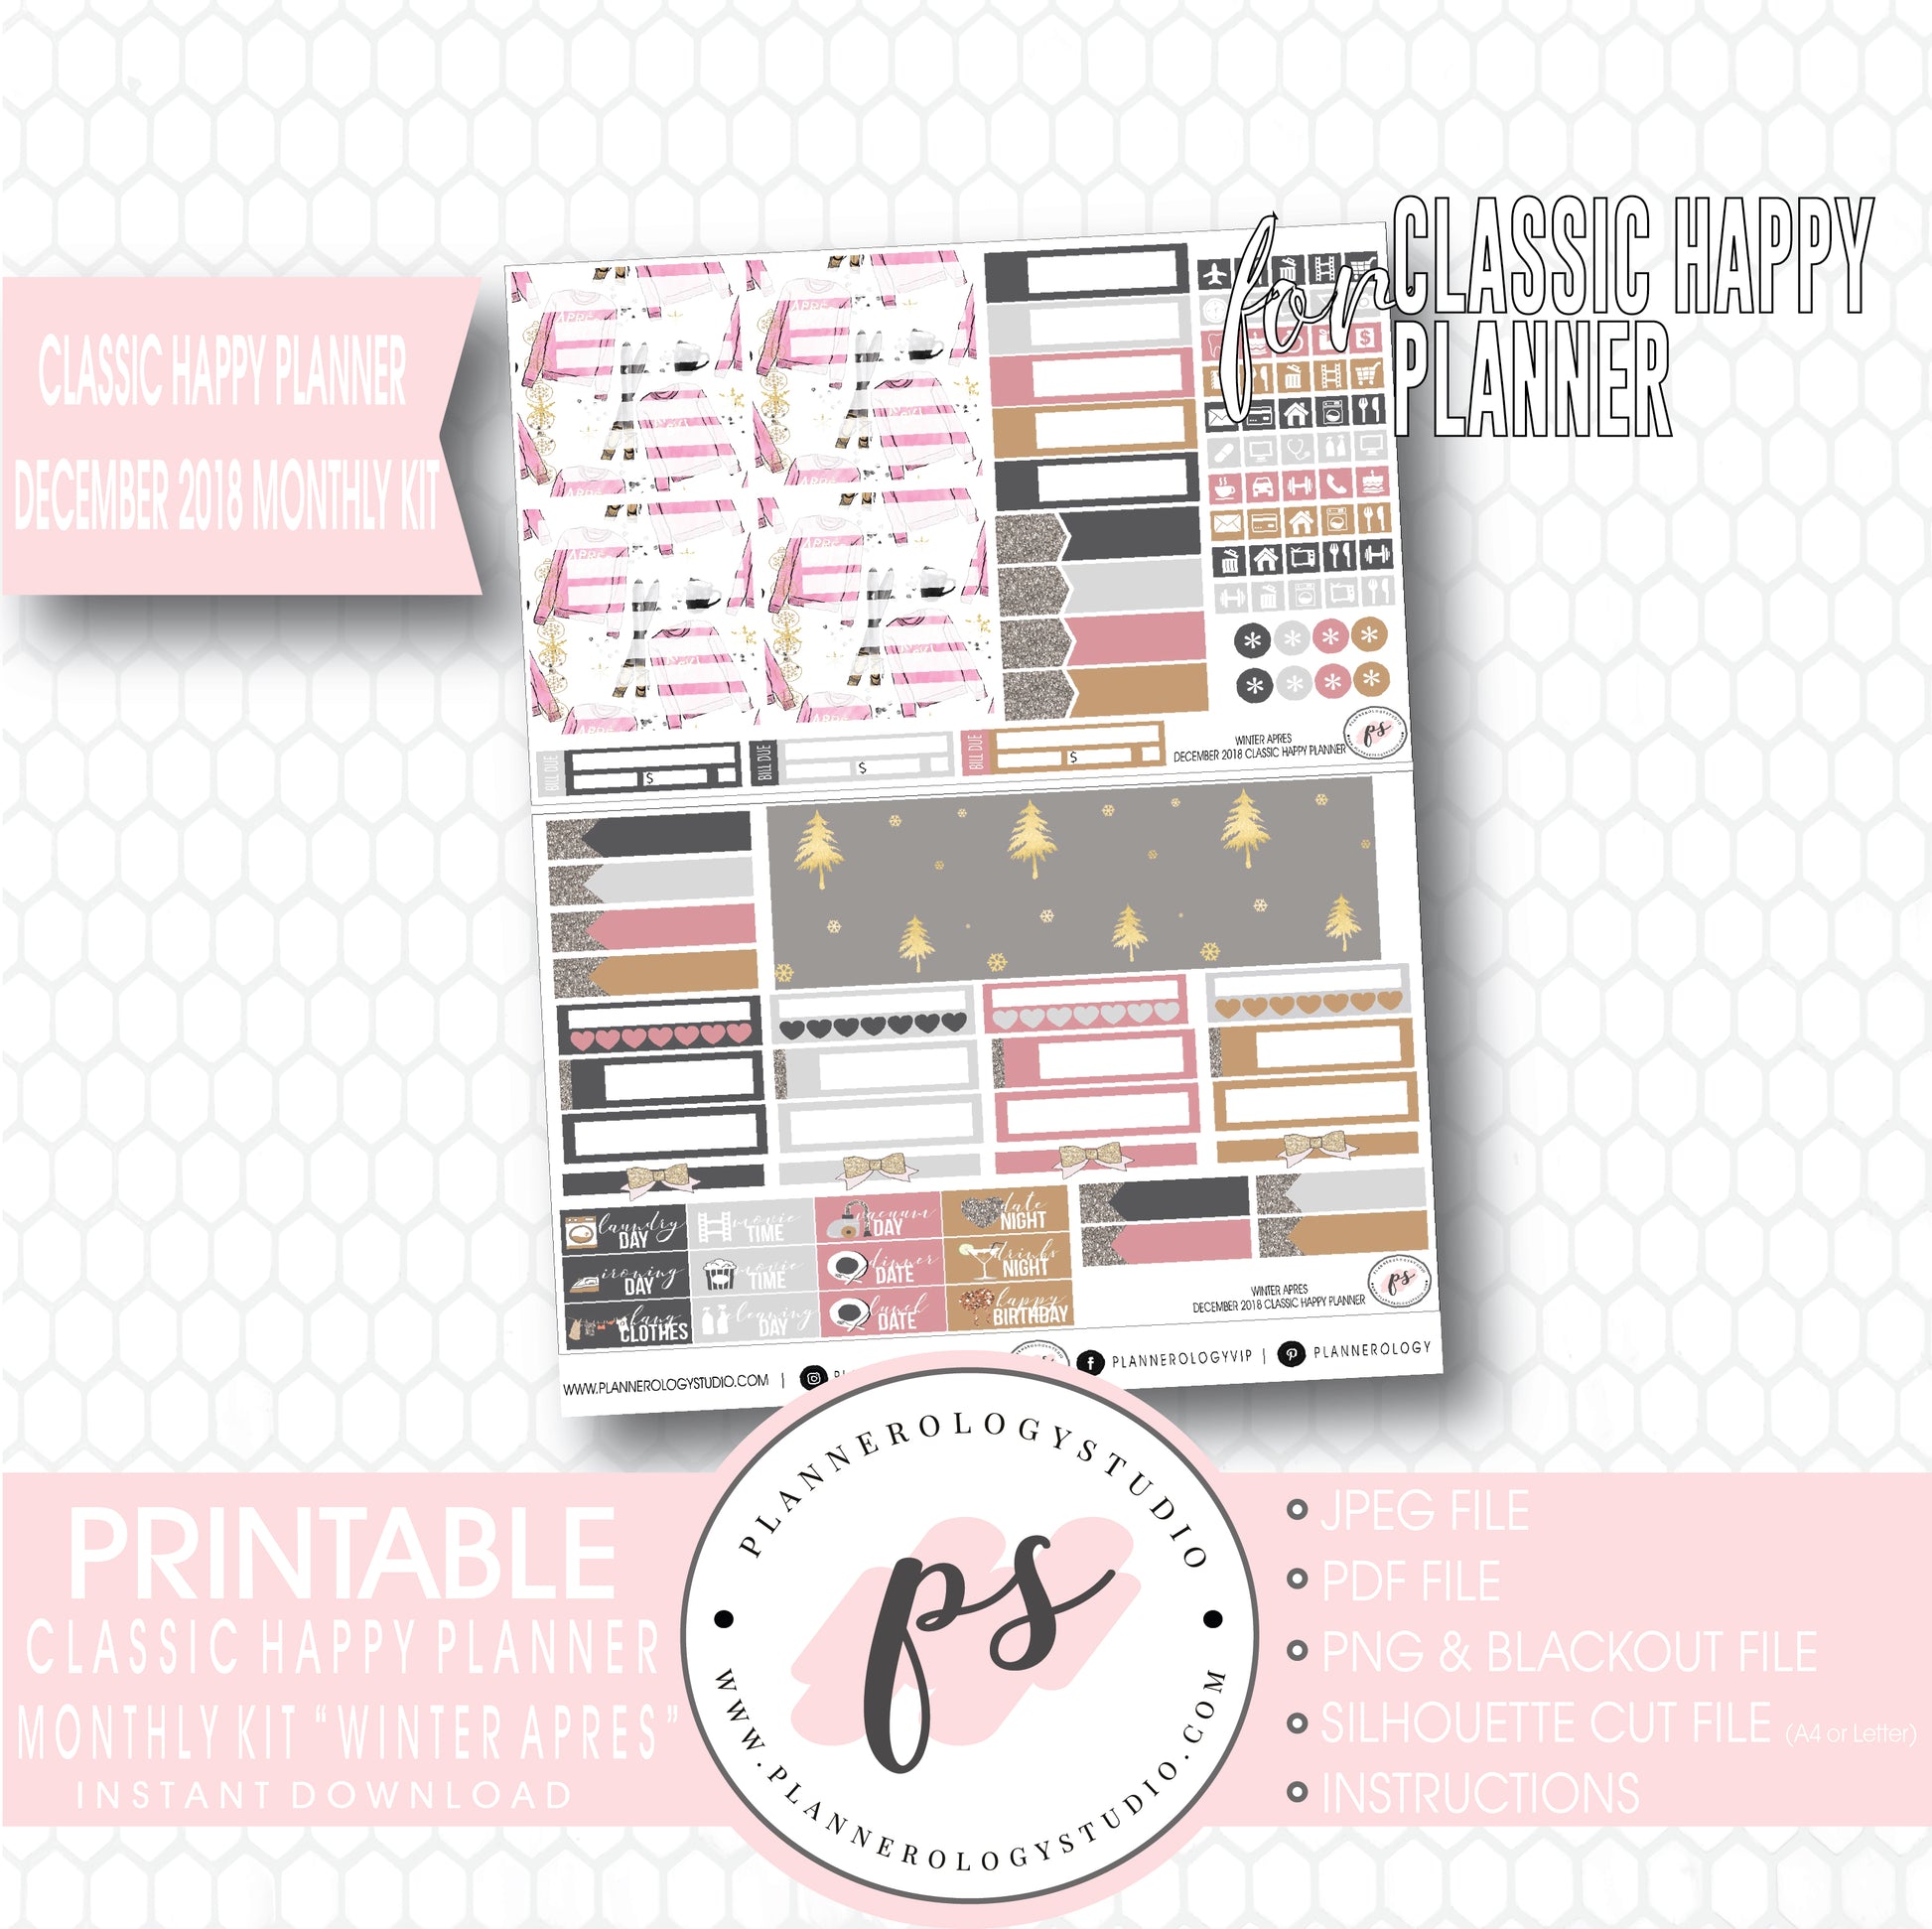 Winter Apres December 2018 Monthly View Kit Digital Printable Planner Stickers (for use with Classic Happy Planner) - Plannerologystudio